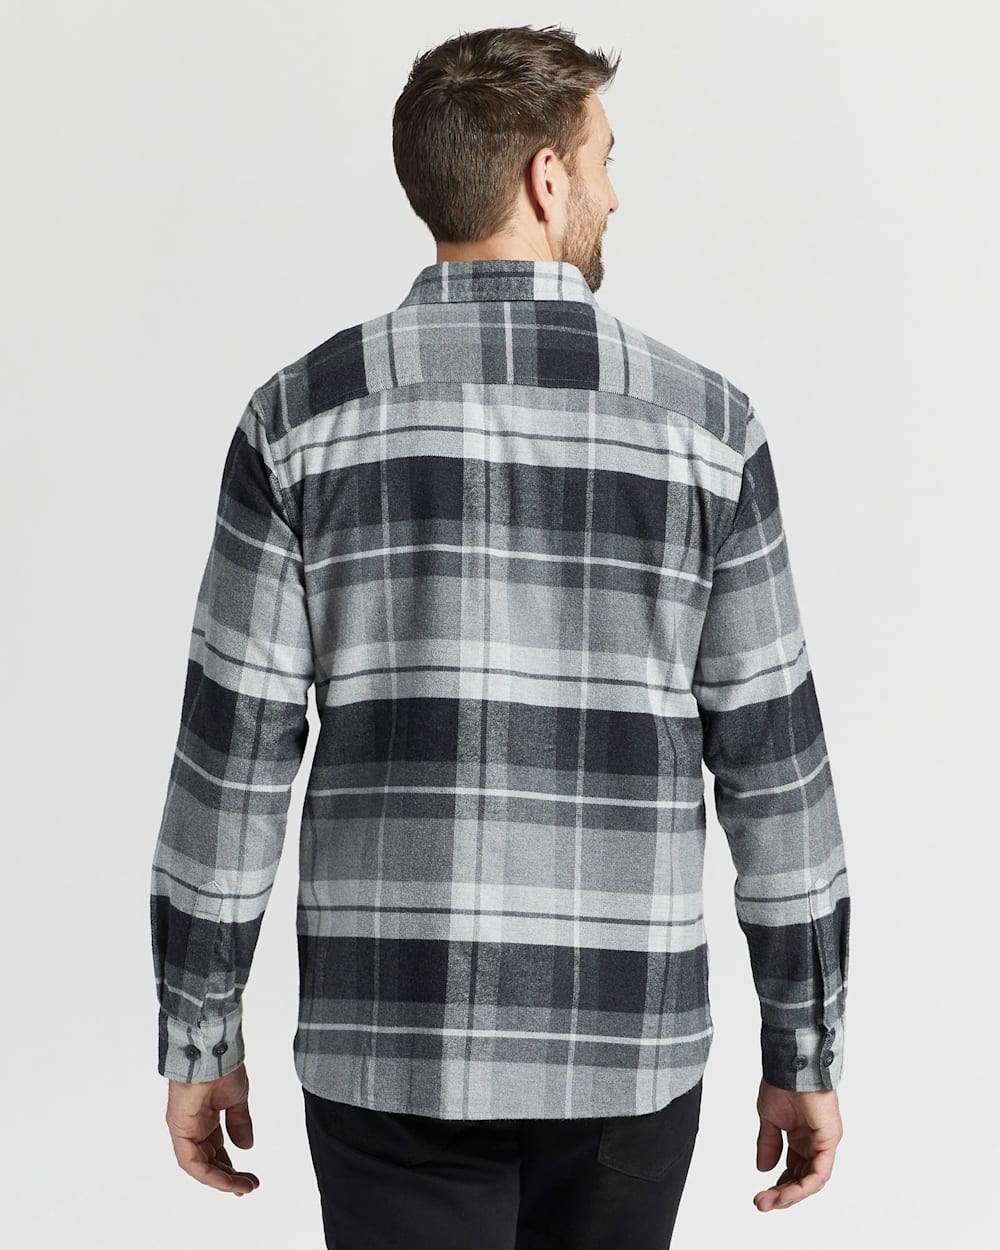 ALTERNATE VIEW OF MEN'S PLAID BURNSIDE DOUBLE-BRUSHED FLANNEL SHIRT IN GREY PLAID image number 3